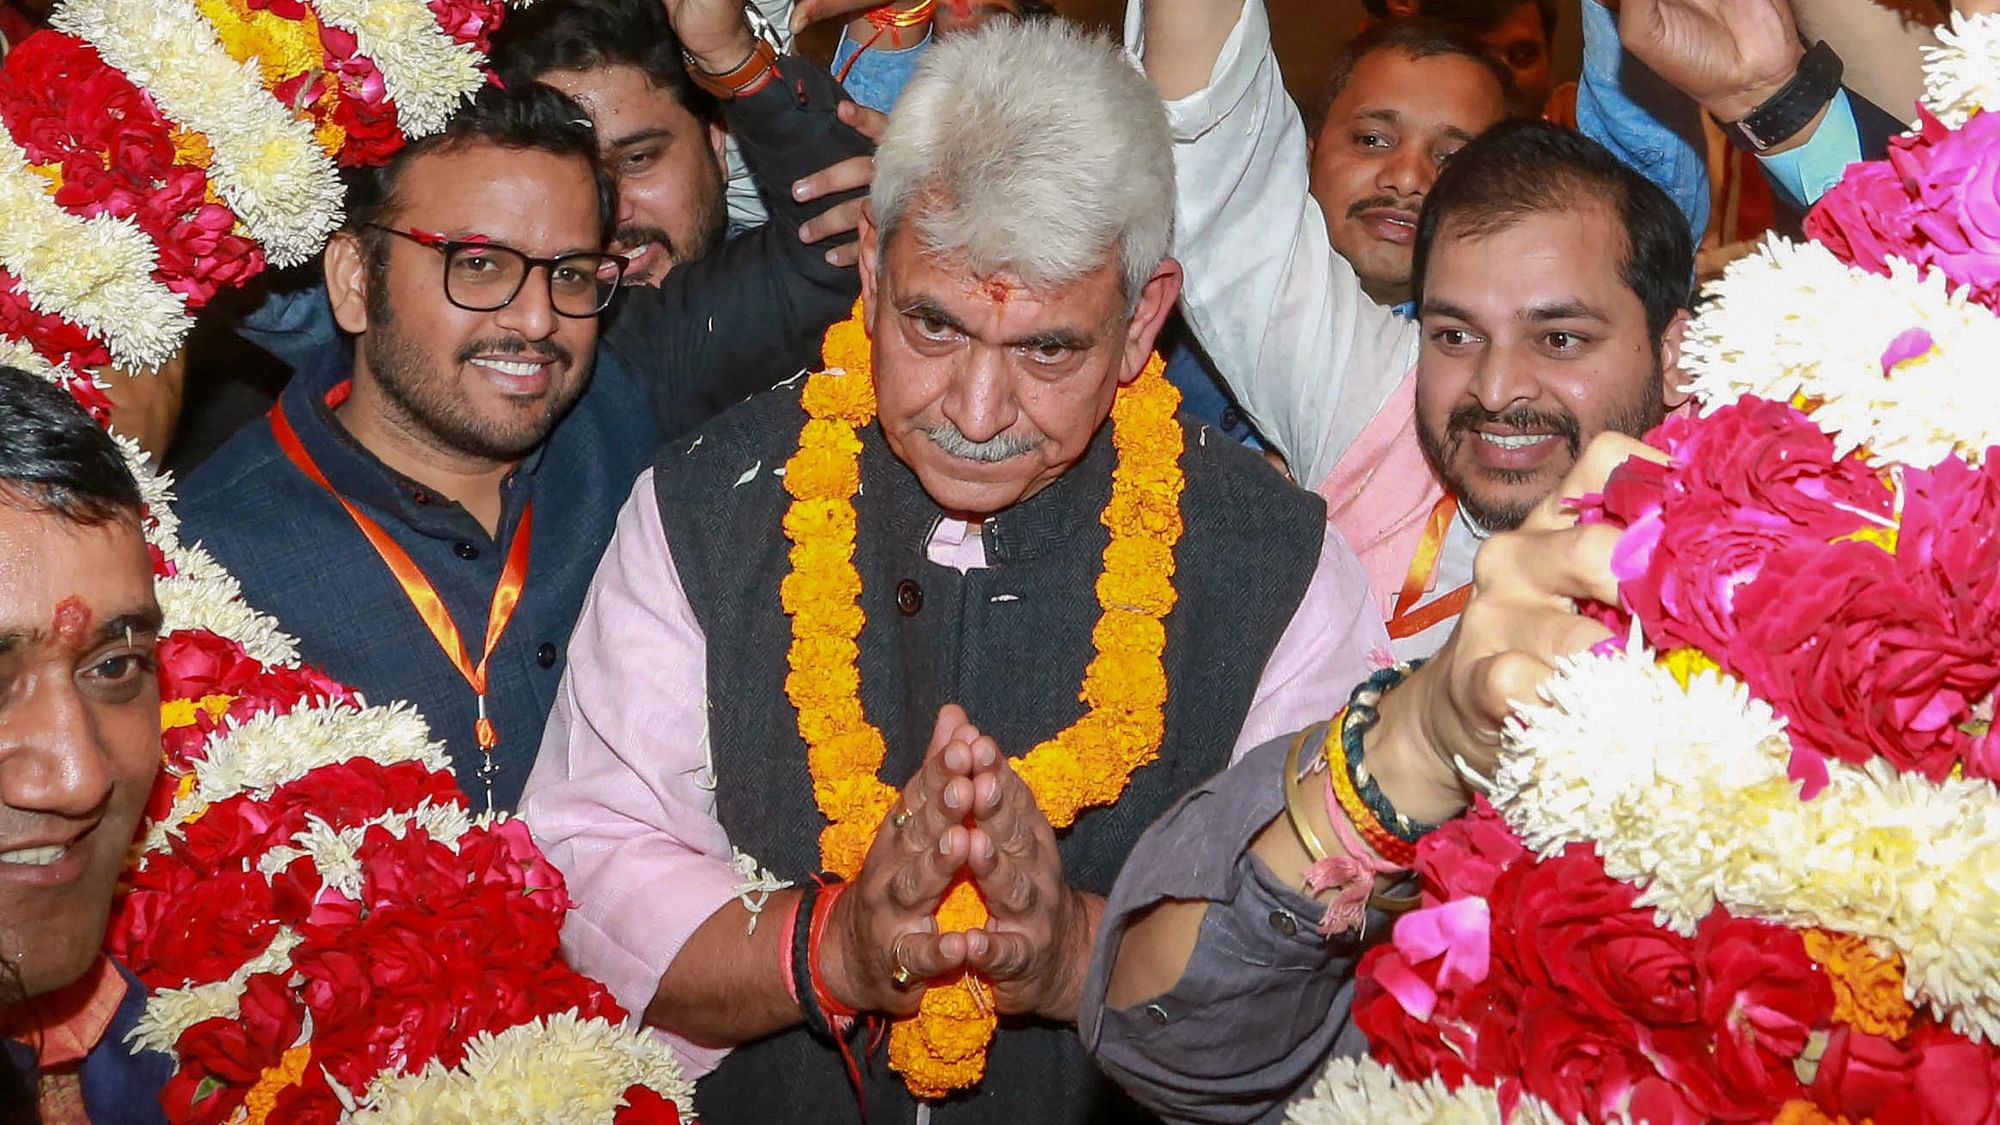 Then Union Communications Minister, and now J&amp;K L-G, Manoj Sinha being felicitated during ‘Ghazipur Samagam’, in Lucknow, Sunday, 9 December 2018. Image used for representation.